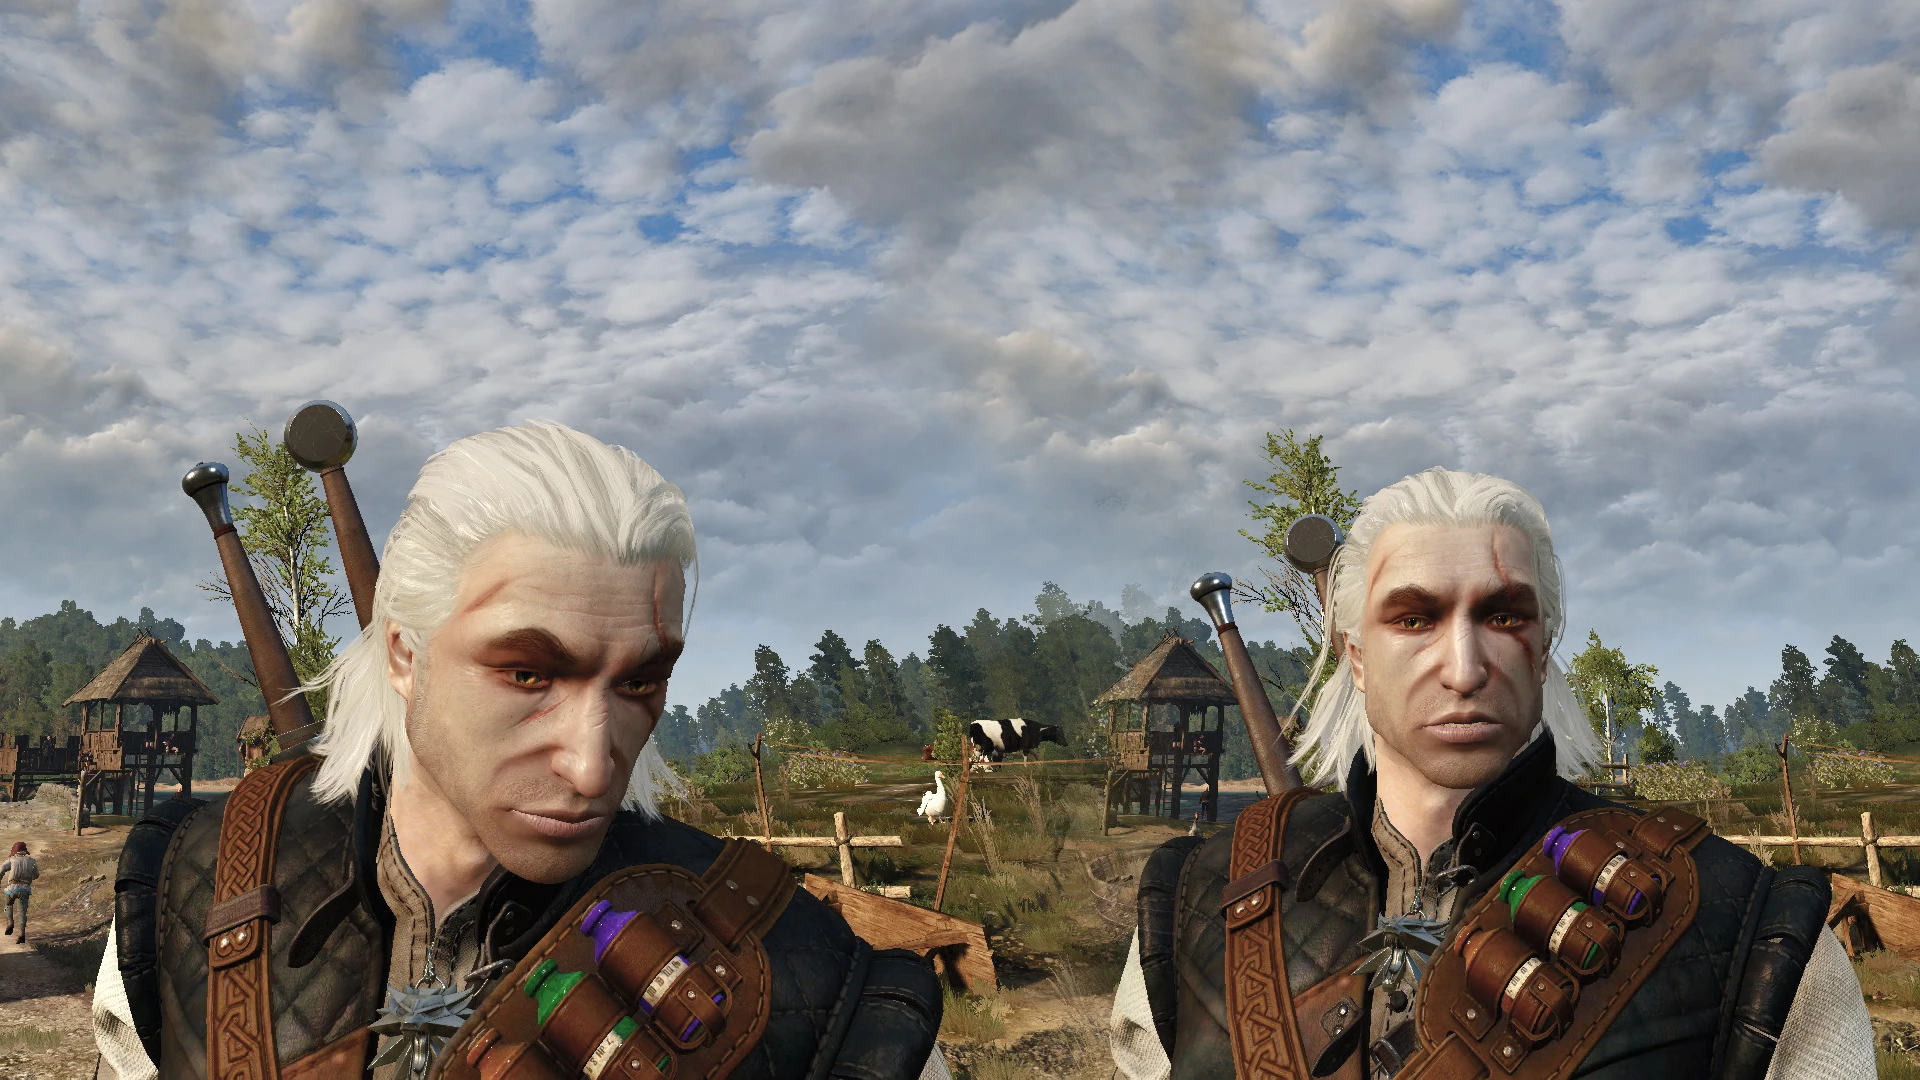 the witcher 1